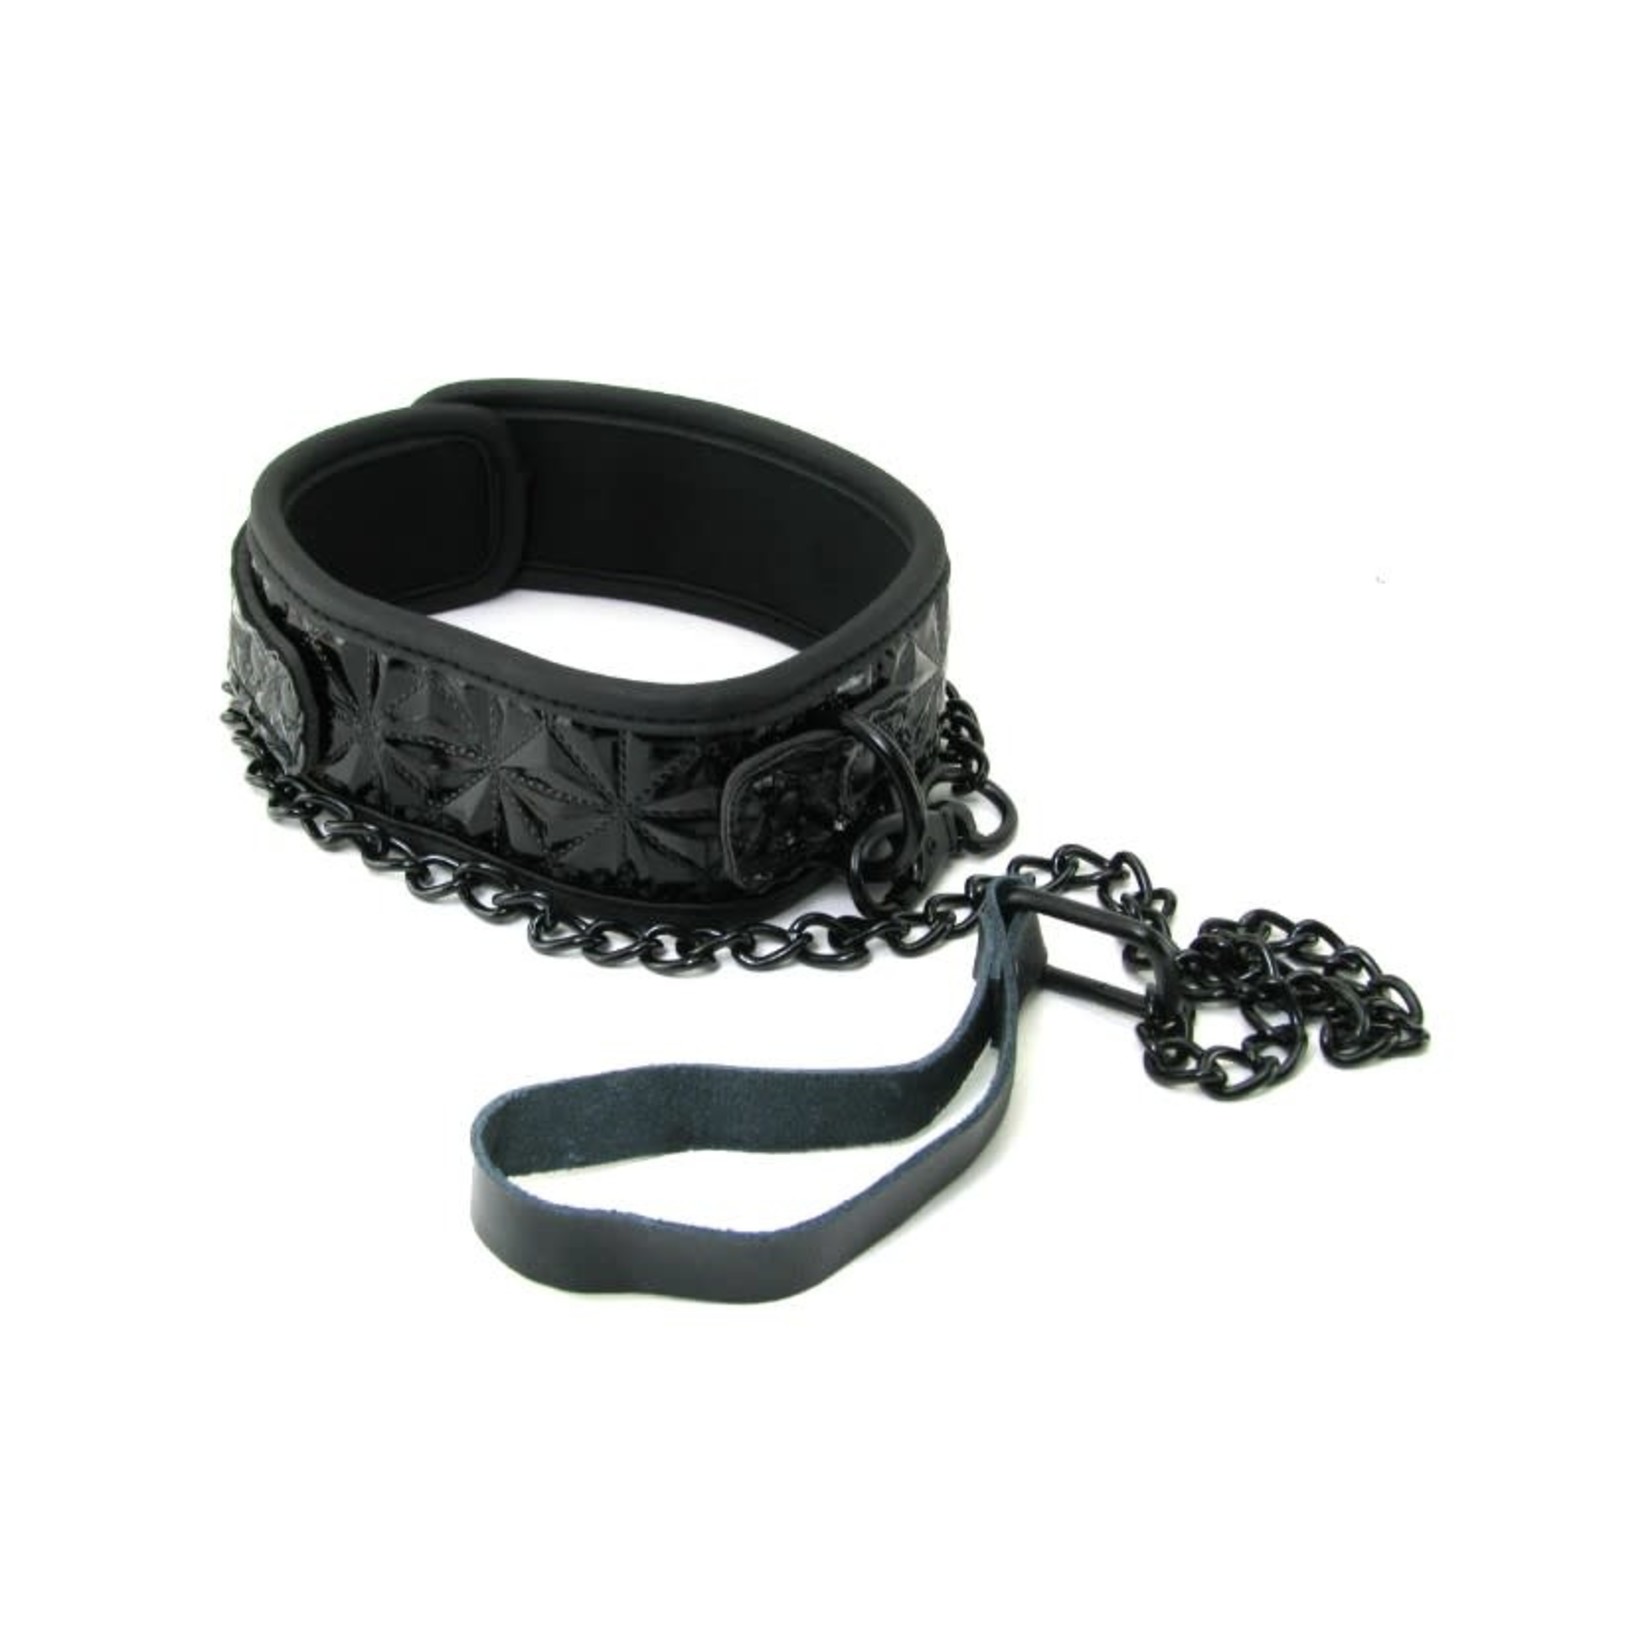 NSNOVELTIES SINFUL COLLAR WITH LEASH BLACK